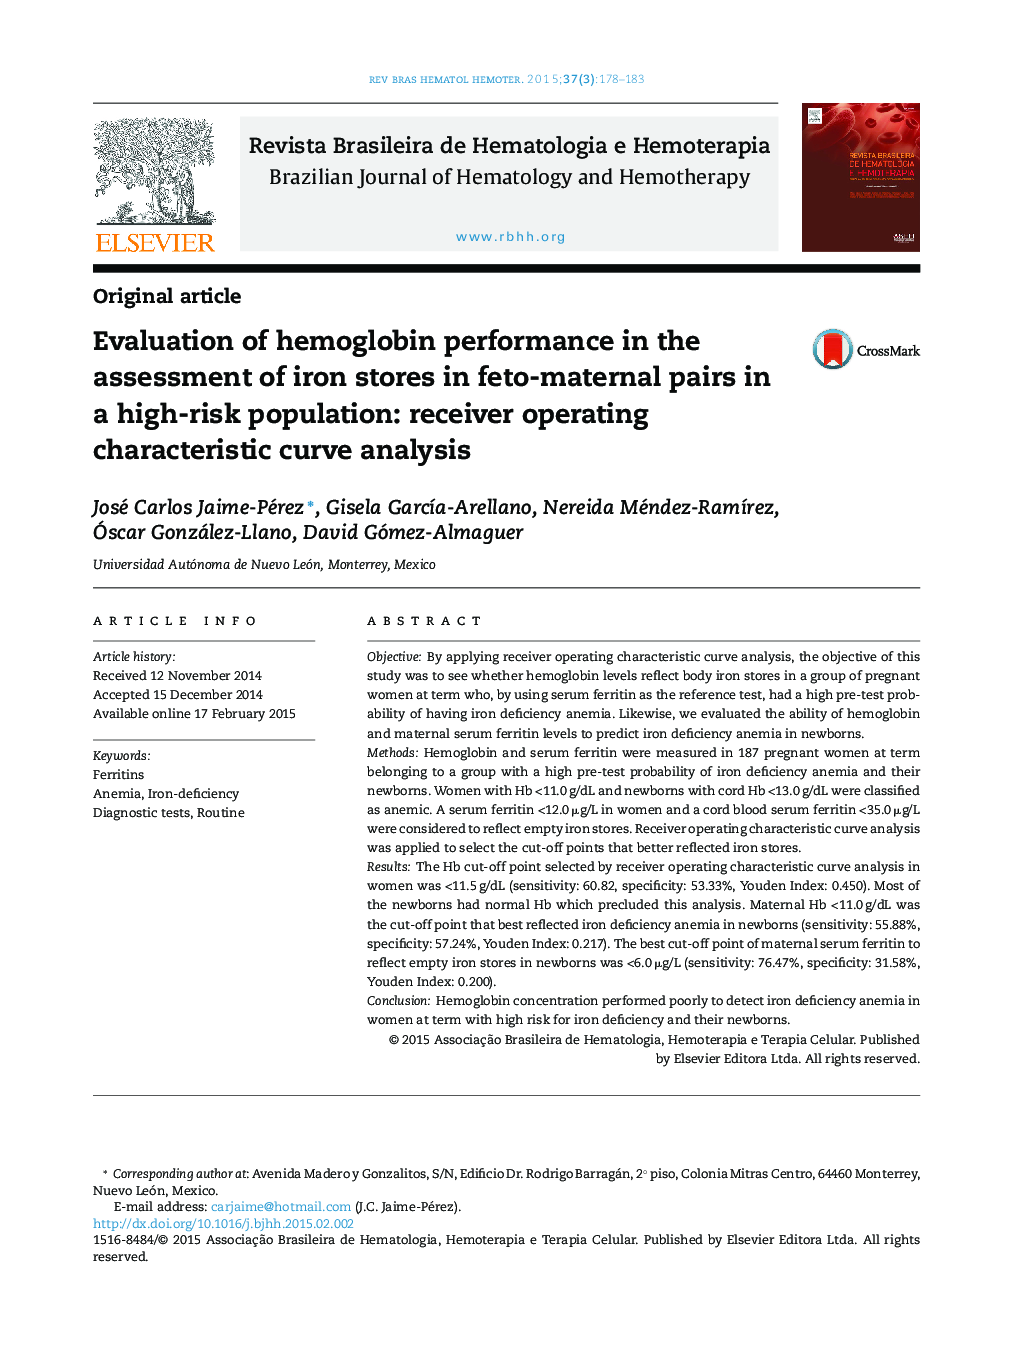 Evaluation of hemoglobin performance in the assessment of iron stores in feto-maternal pairs in a high-risk population: receiver operating characteristic curve analysis